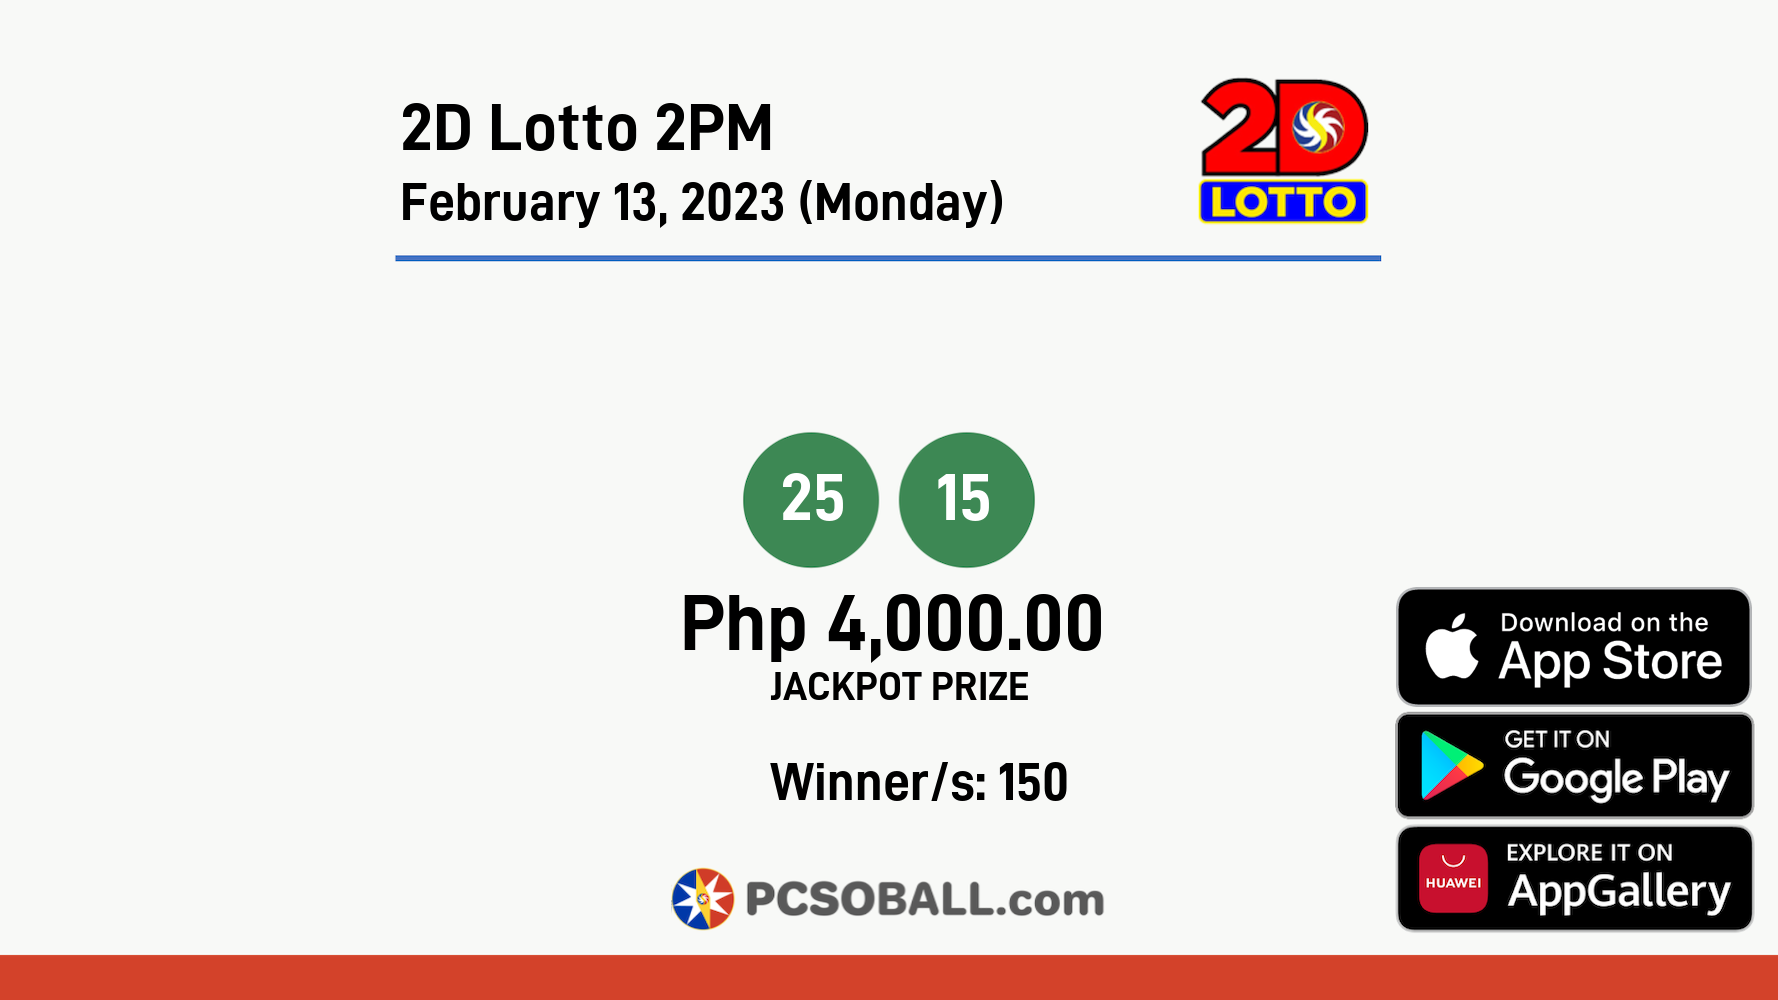 2D Lotto 2PM February 13, 2023 (Monday) Result